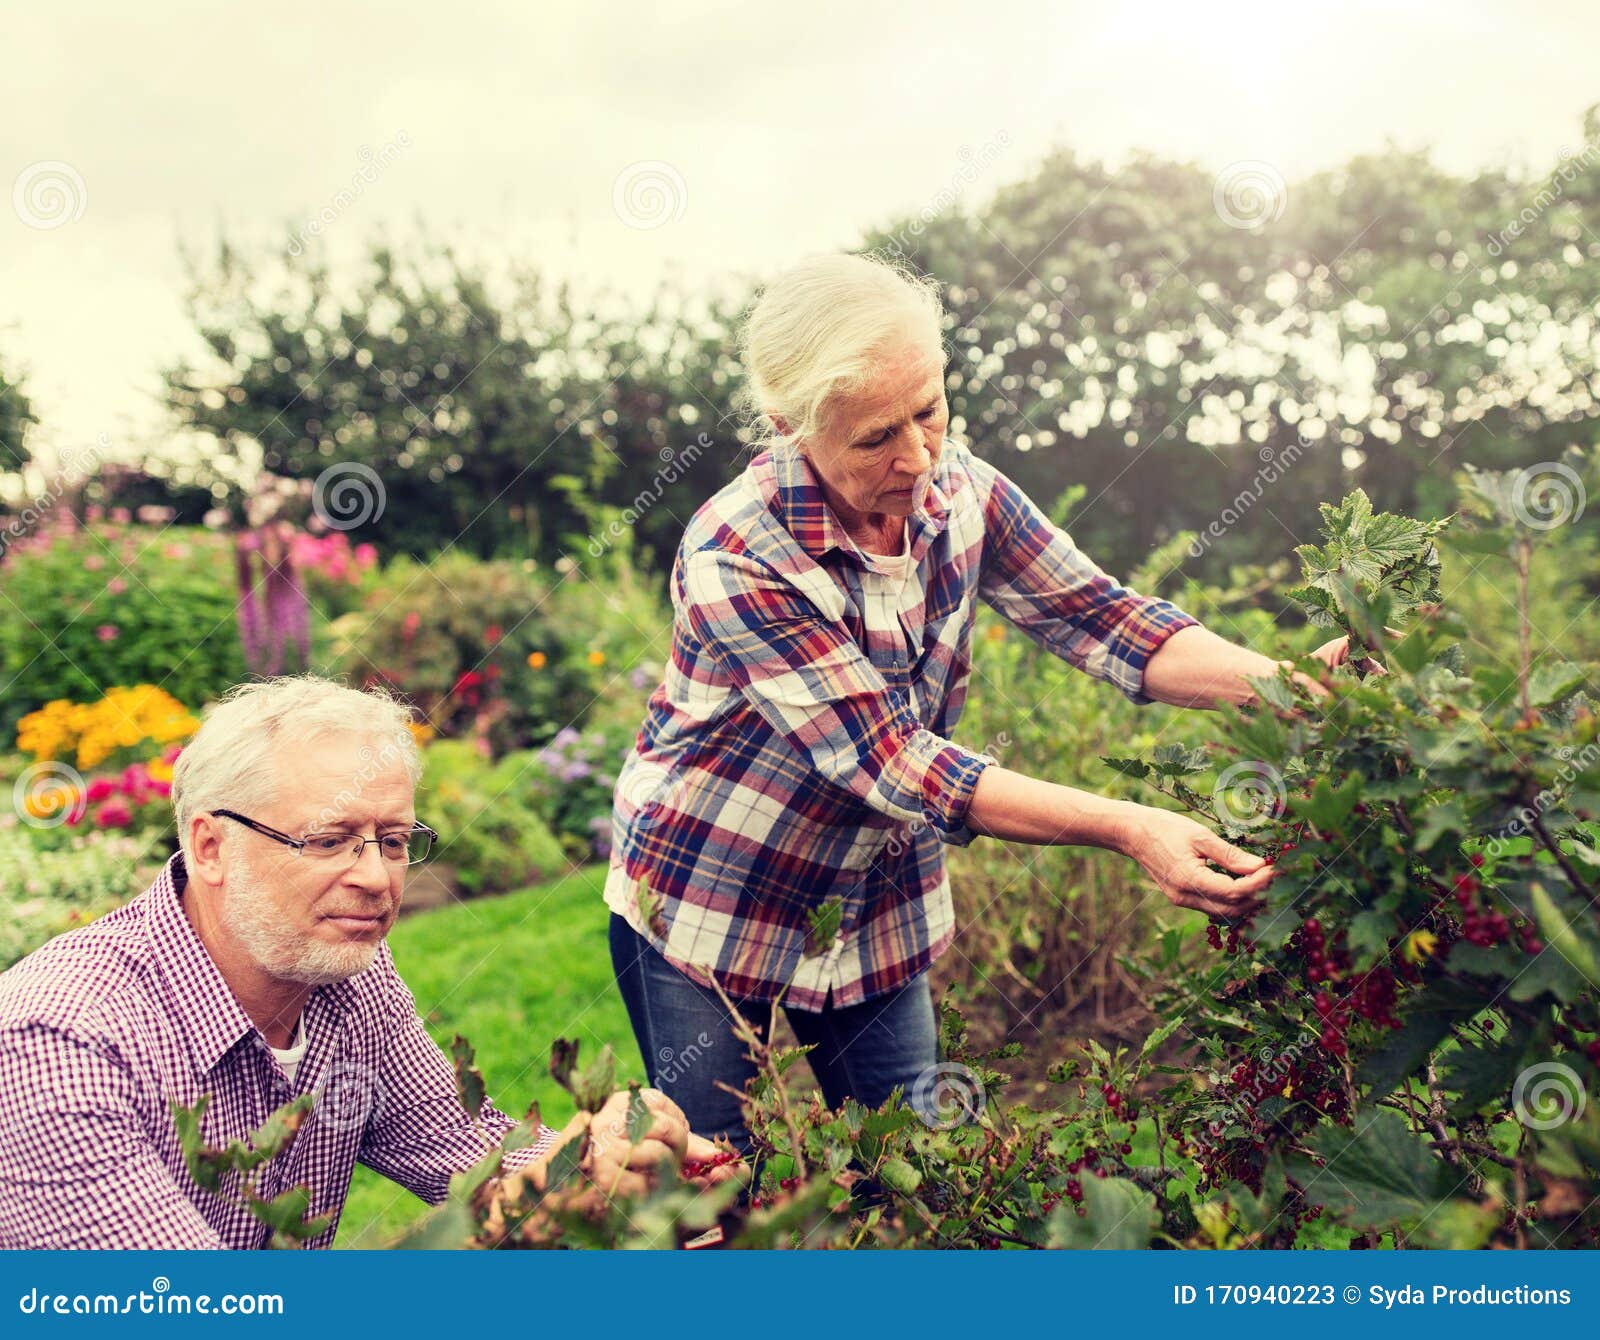 Senior Couple Harvesting Currant at Summer Garden Stock Image - Image ...